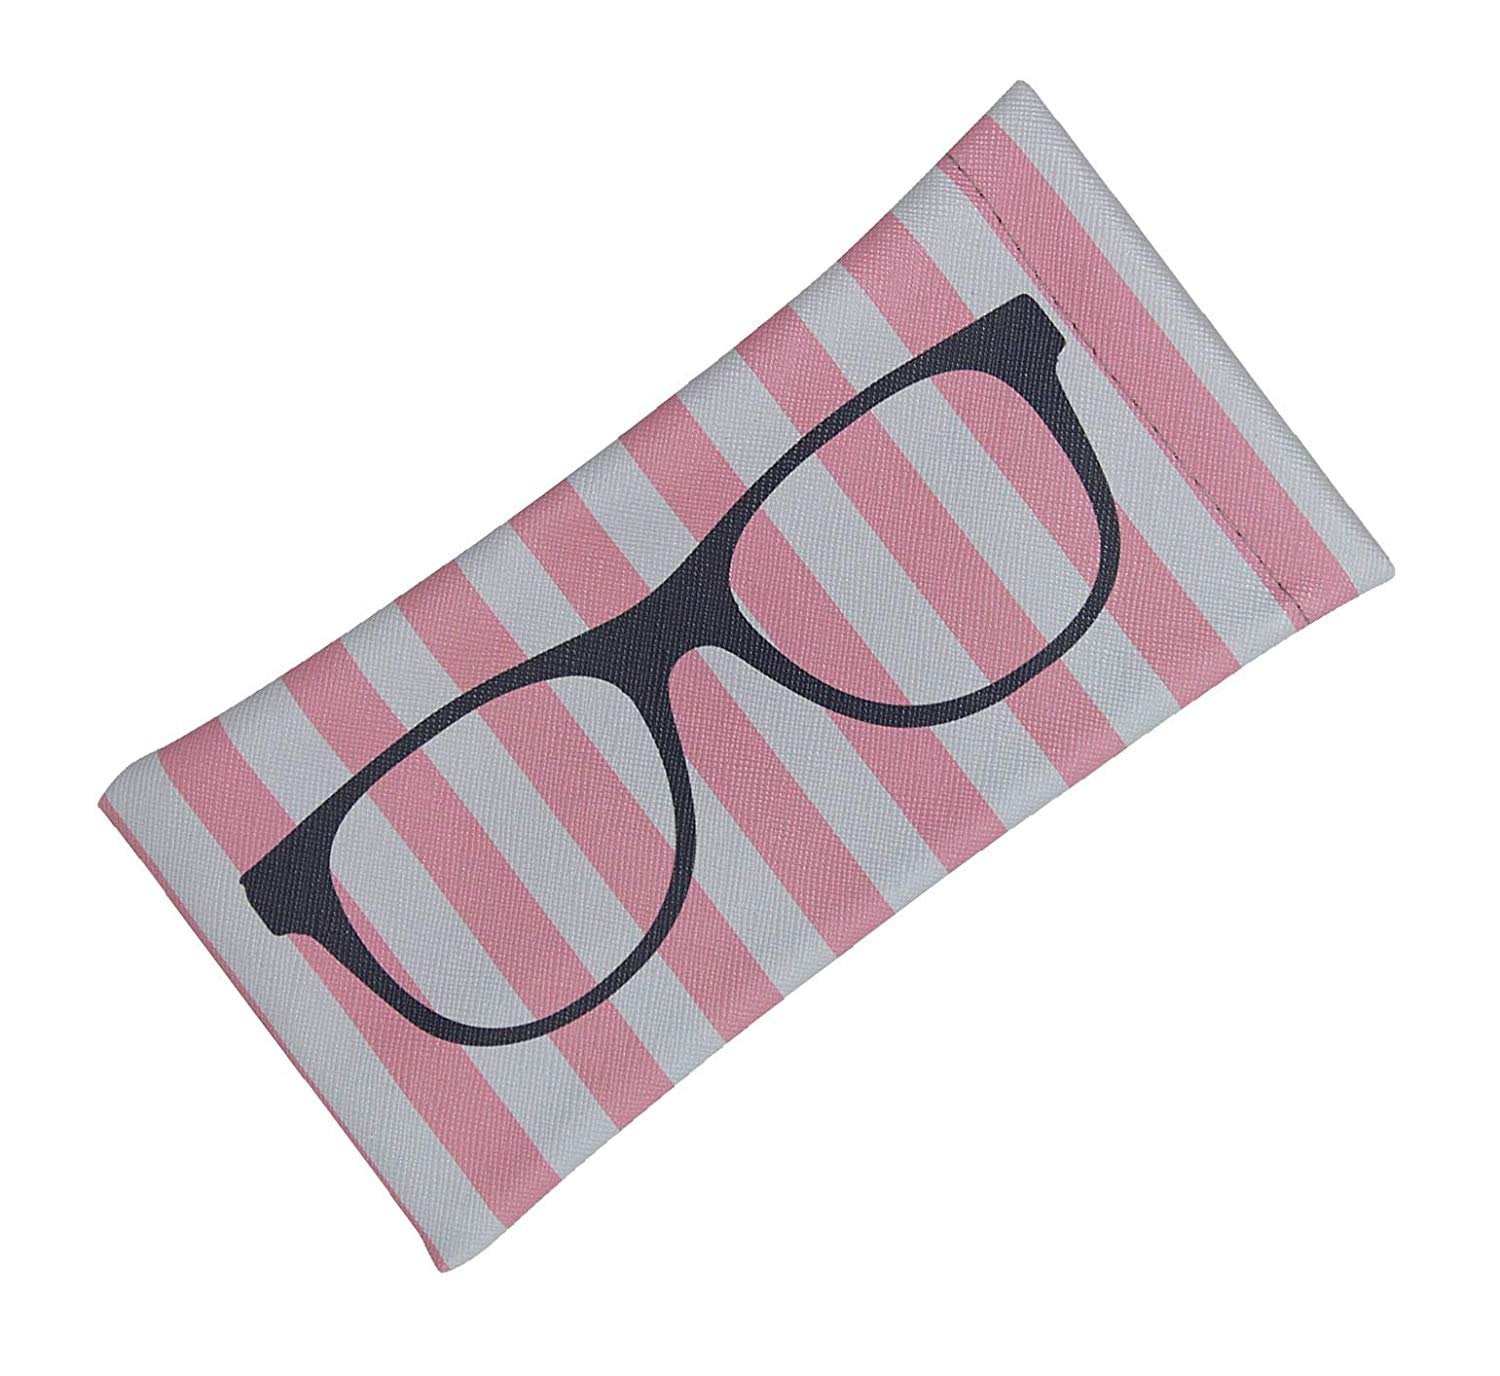 Soft Sunglasses case | Large Glasses Case Holder - Eyeglass Pouch Squeeze  Top | Glasses pouch Lightweight Extra Layers